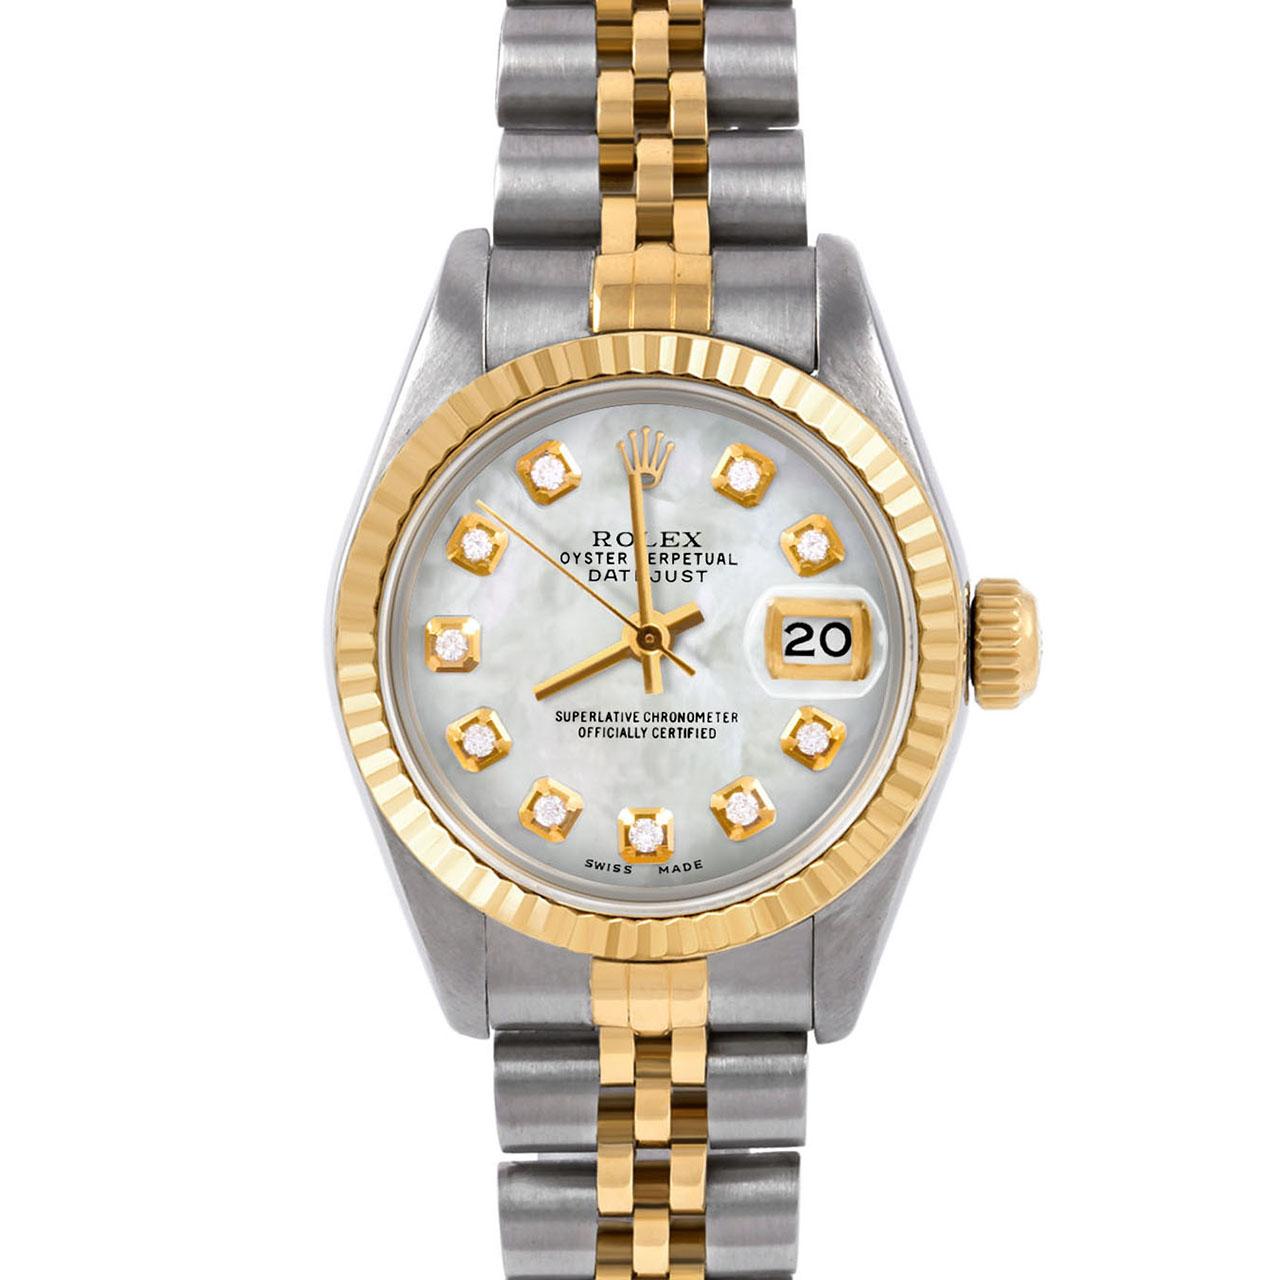 Swiss Wrist - SKU 6917-TT-WMOP-DIA-AM-FLT-JBL

Brand : Rolex
Model : Datejust (Non-Quickset Model)
Gender : Ladies
Metals : 14K/Stainless Steel
Case Size : 26 mm

Dial : Custom Mother Of Pearl Diamond Dial (This dial is not original Rolex And has